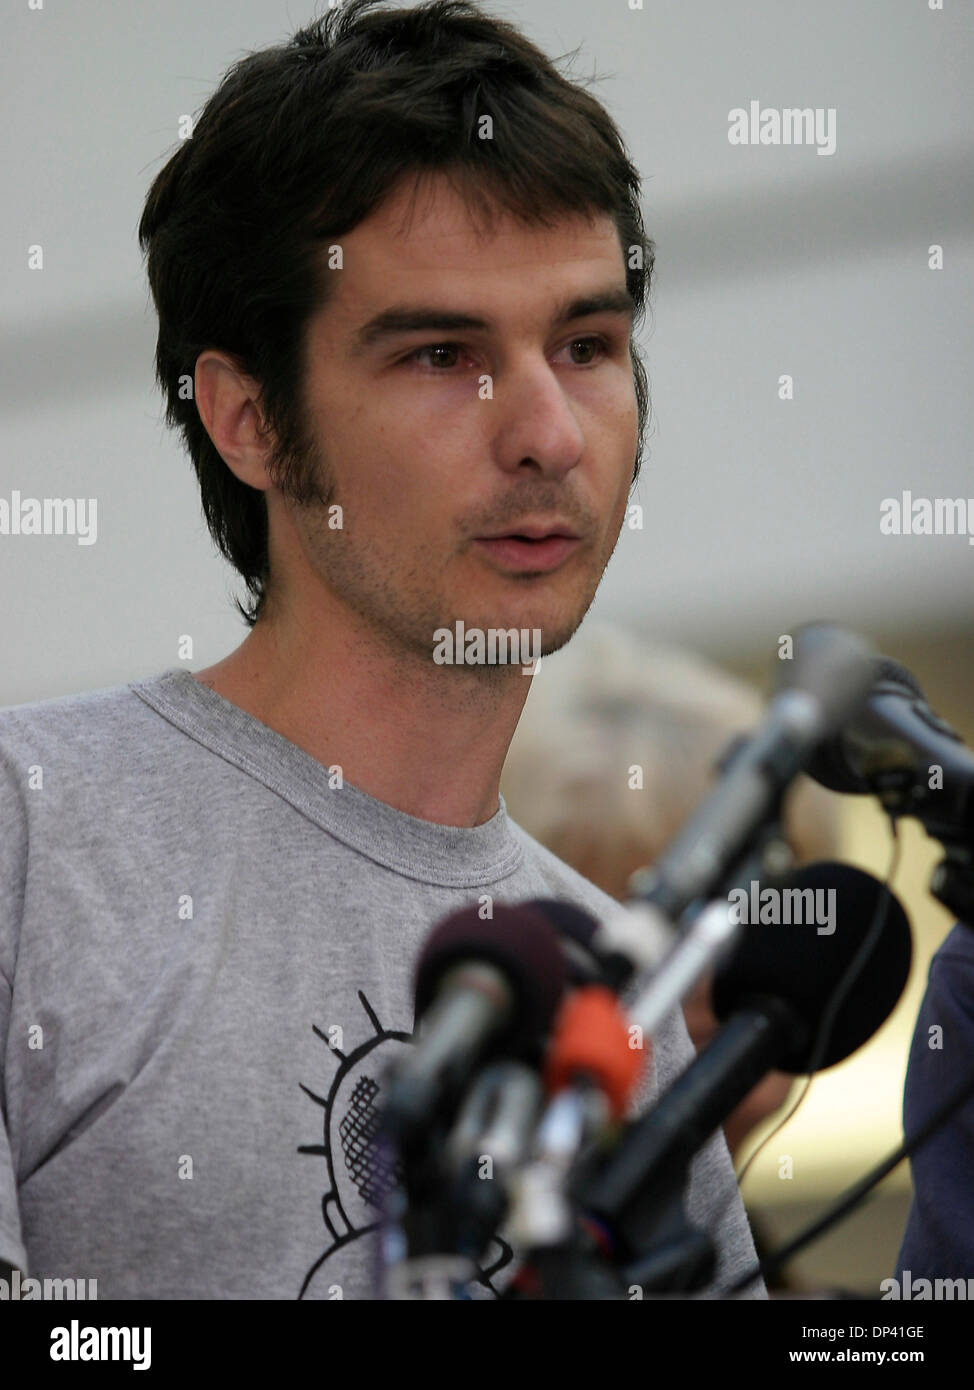 Jul 20, 2006; Baltimore, Maryland, USA; STEPHEN MCINERNEY speak to the press about his experience fleeing Lebanon where the Israeli - Hezbollah conflict continues to intensify. The first flight of American refugees from Lebanon arrived at BWI Airport (Baltimore/Washington) this morning. Most were American citizens visiting Lebanon at the time of the most recent attacks by Israel, a Stock Photo